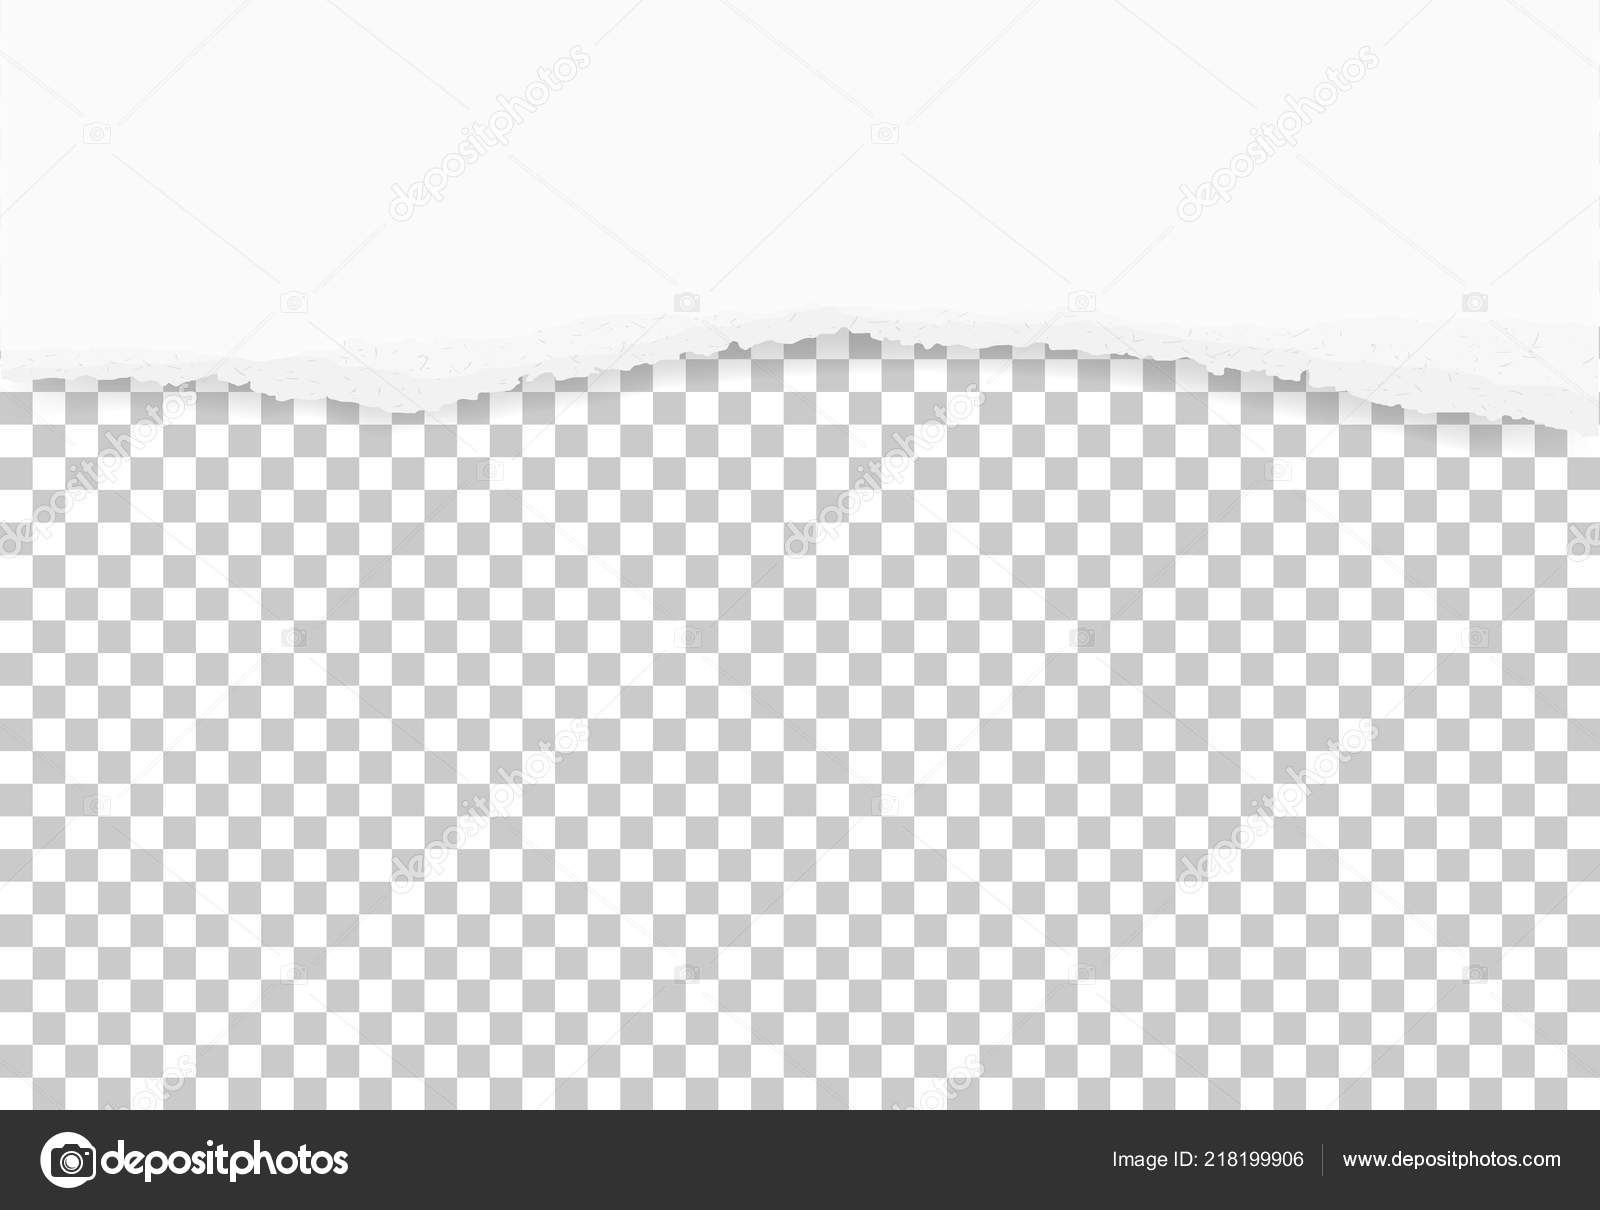 Ripped Paper PNG - Ripped Paper Edge, Ripped Paper Photoshop, Ripped Paper  Font. - CleanPNG / KissPNG